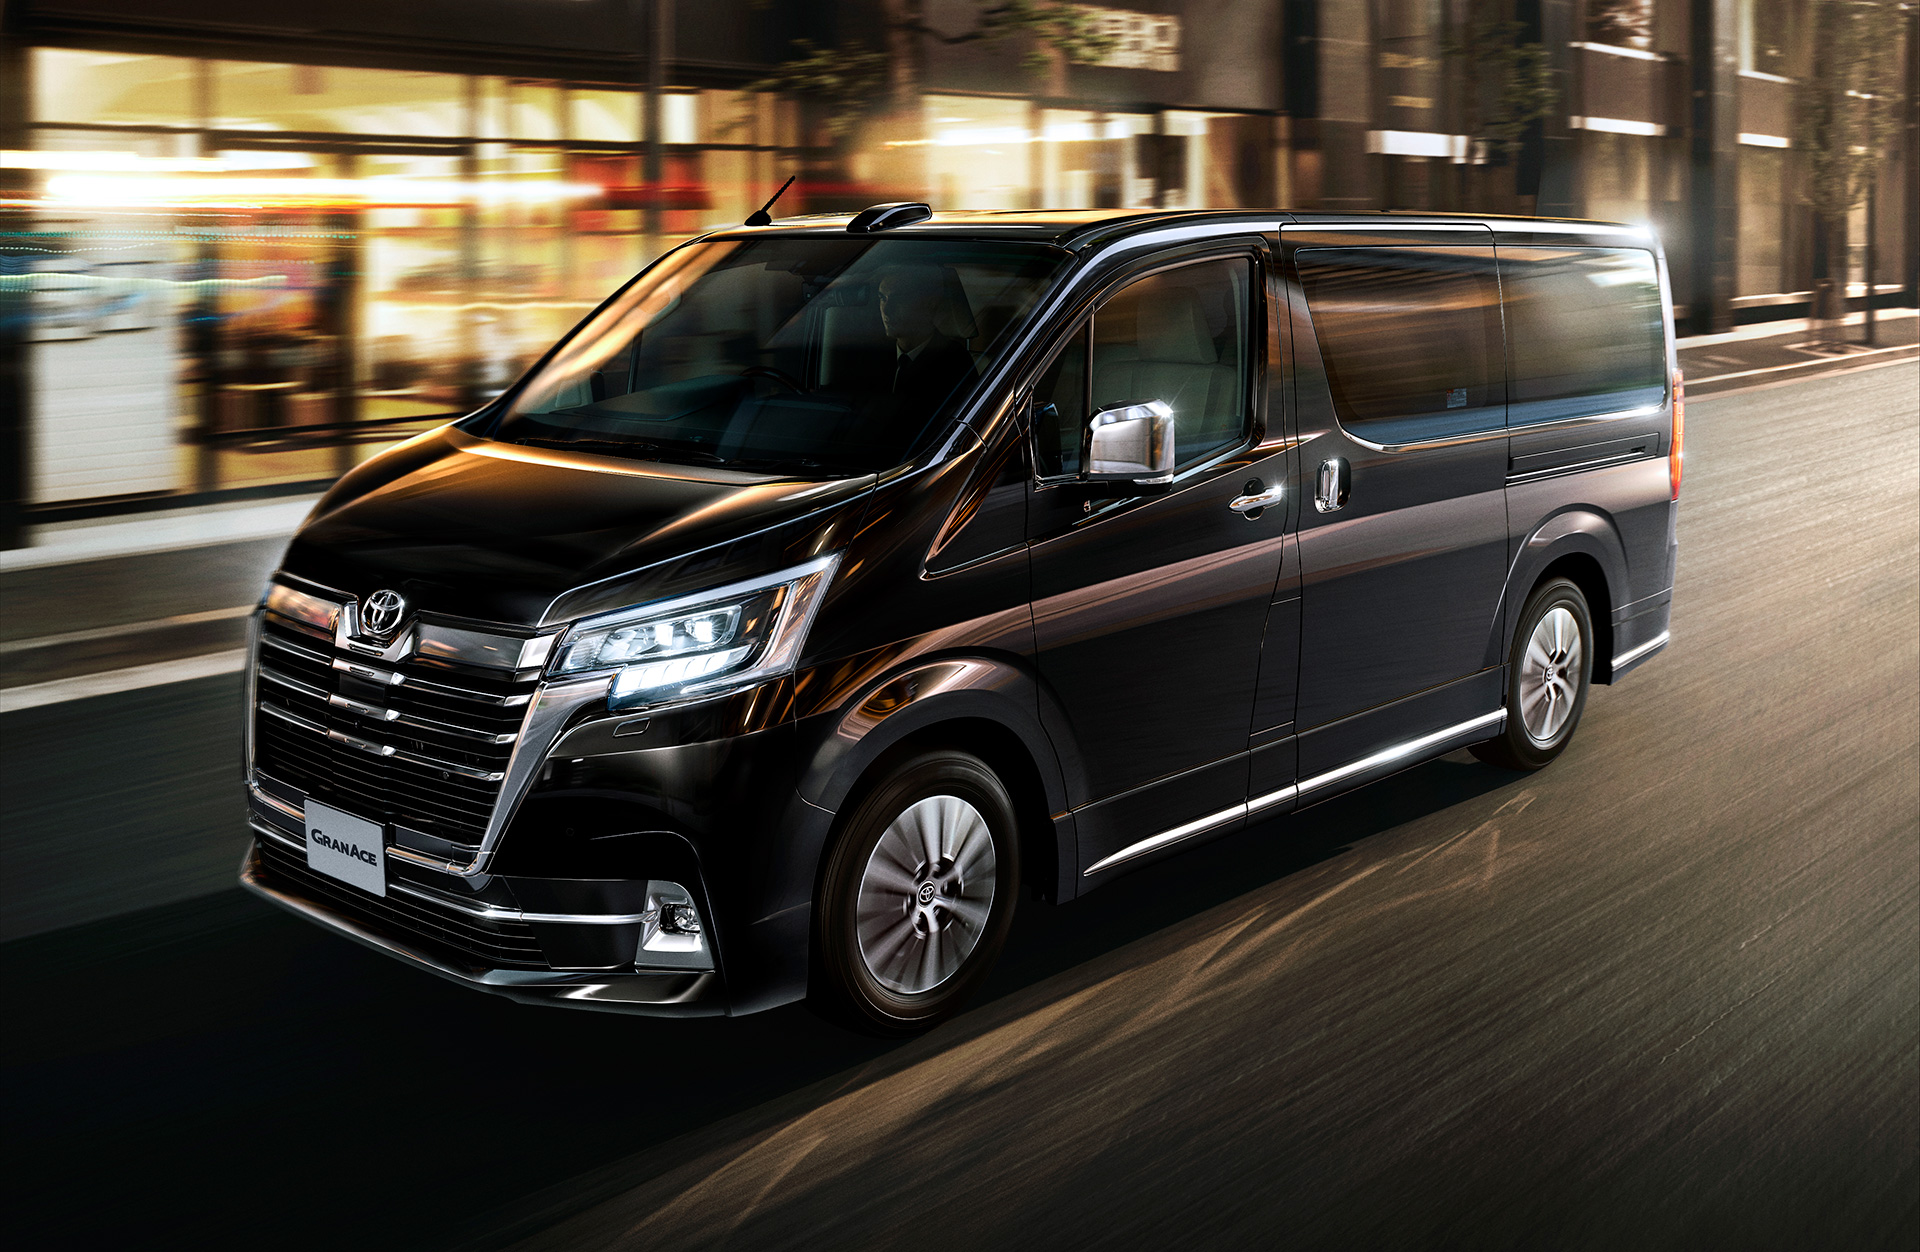 Toyota to Launch New Model "Granace" in JapanSales of large luxury wagon to start from December 16 - Image 1